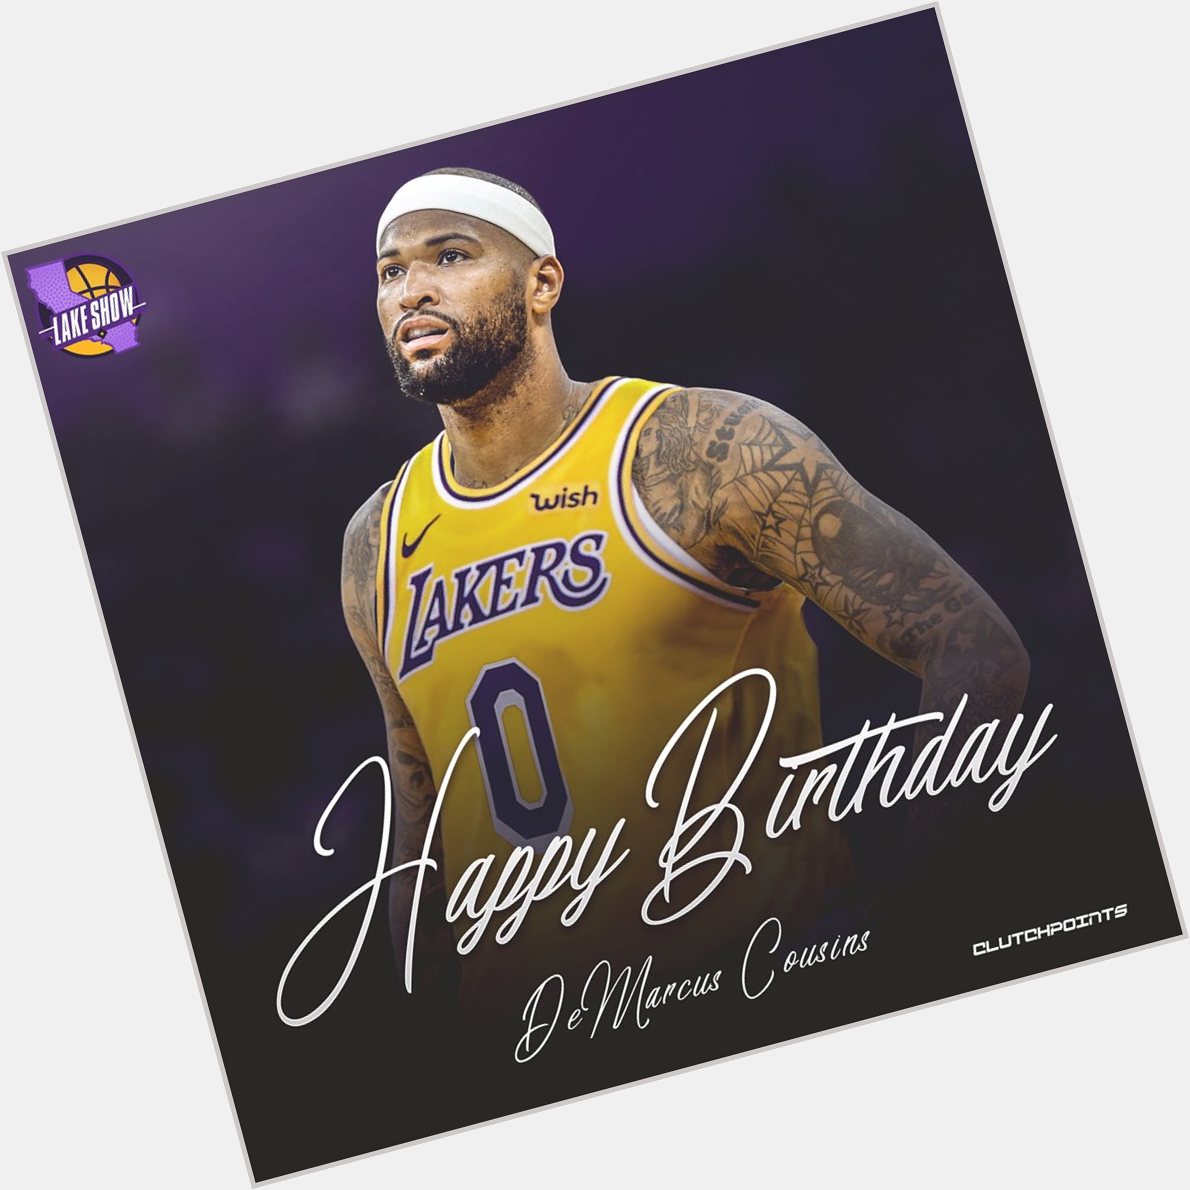 Join Lakeshow in wishing 4x All-Star, DeMarcus Cousins, a happy 29th birthday!    